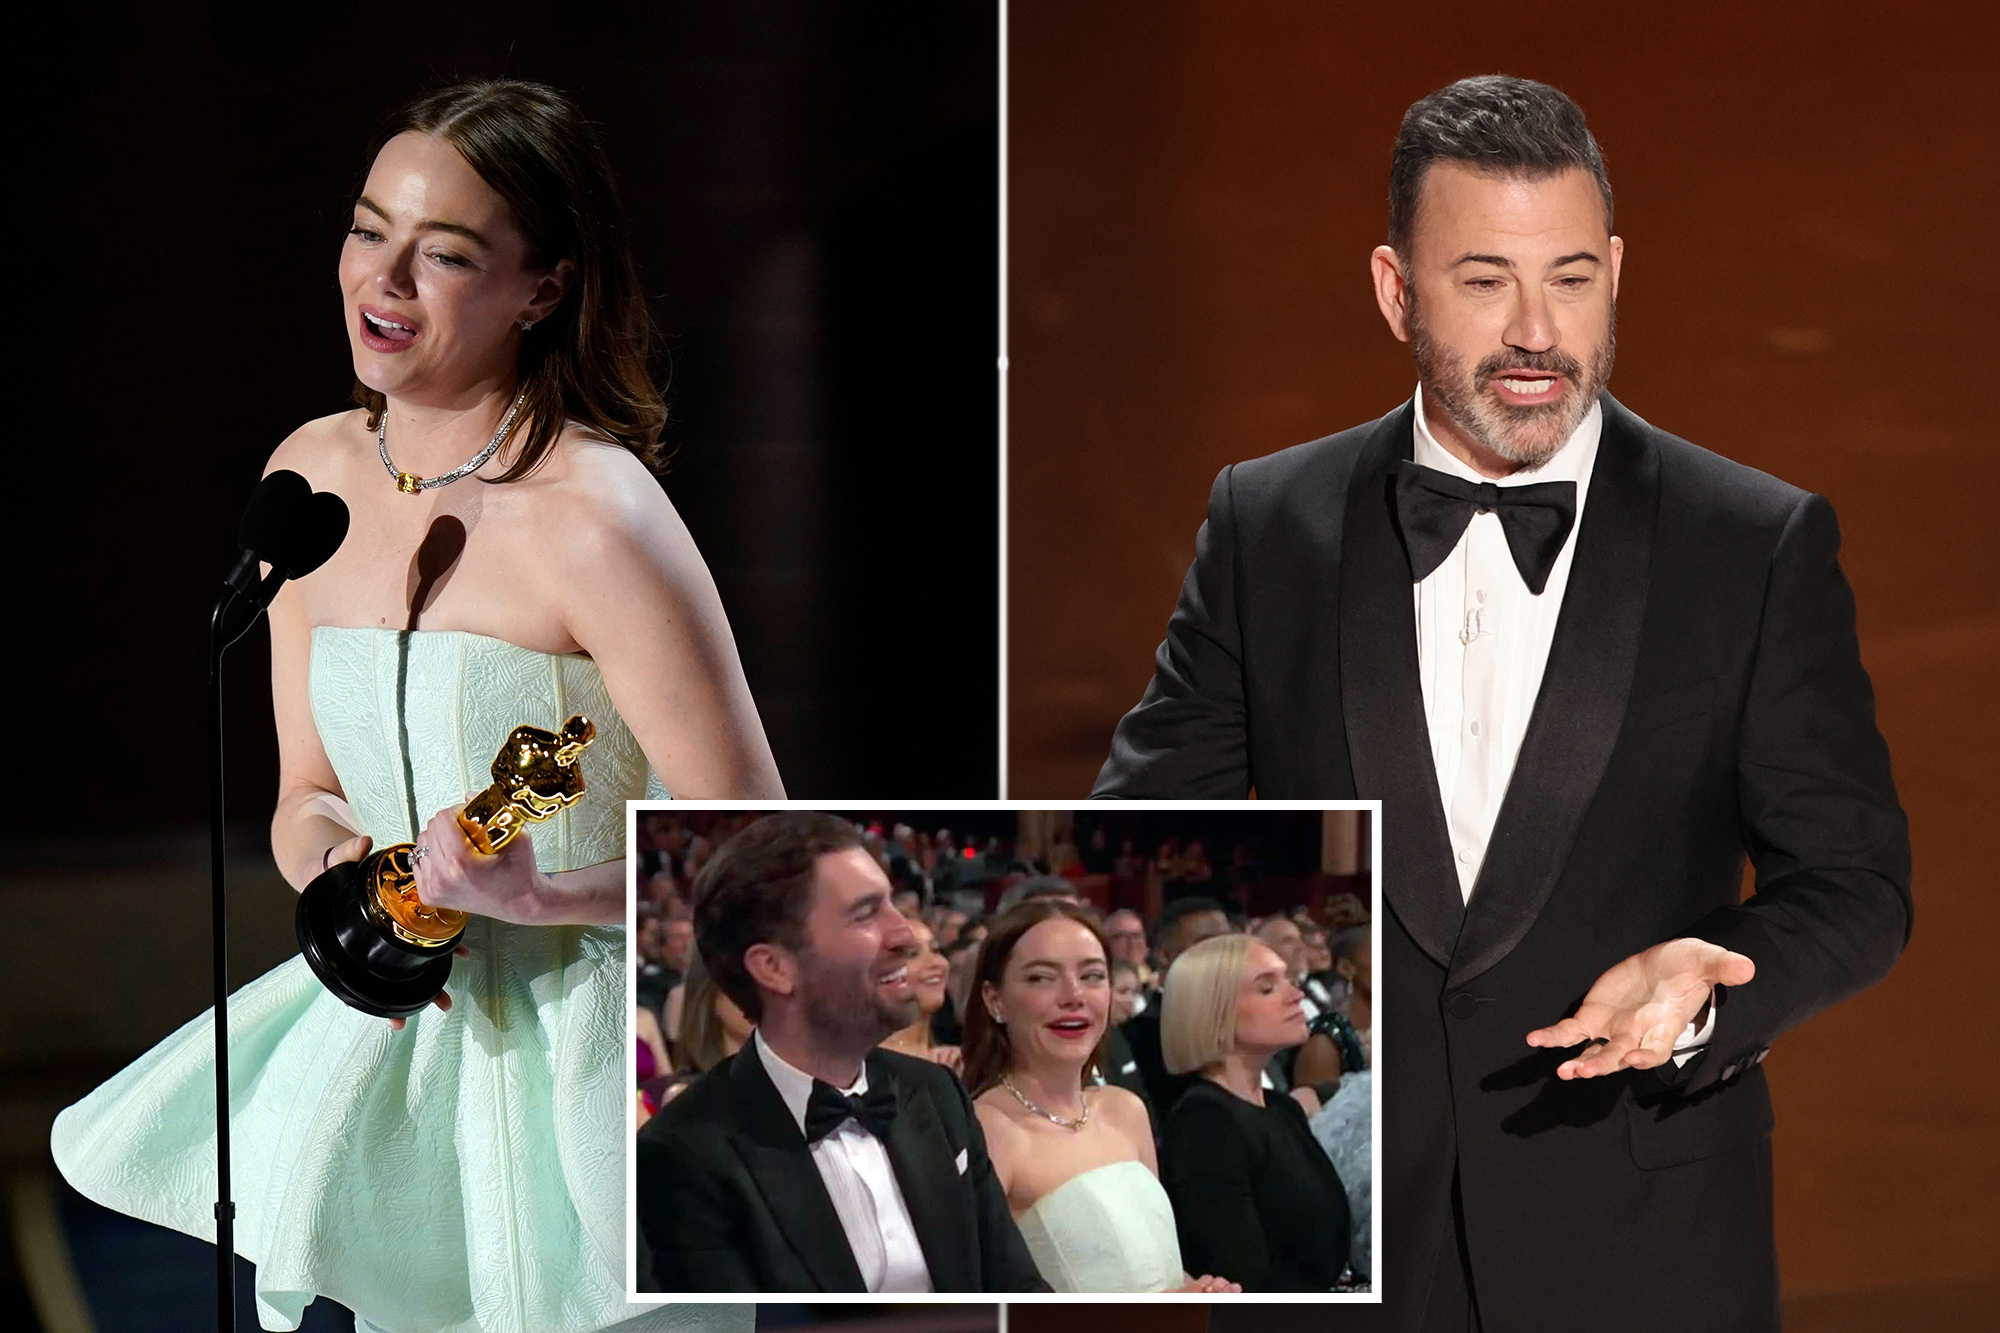 A month after Hollywood's biggest night, Emma Stone is clearing the air on her allegedly calling Oscars host Jimmy Kimmel a "p---k."